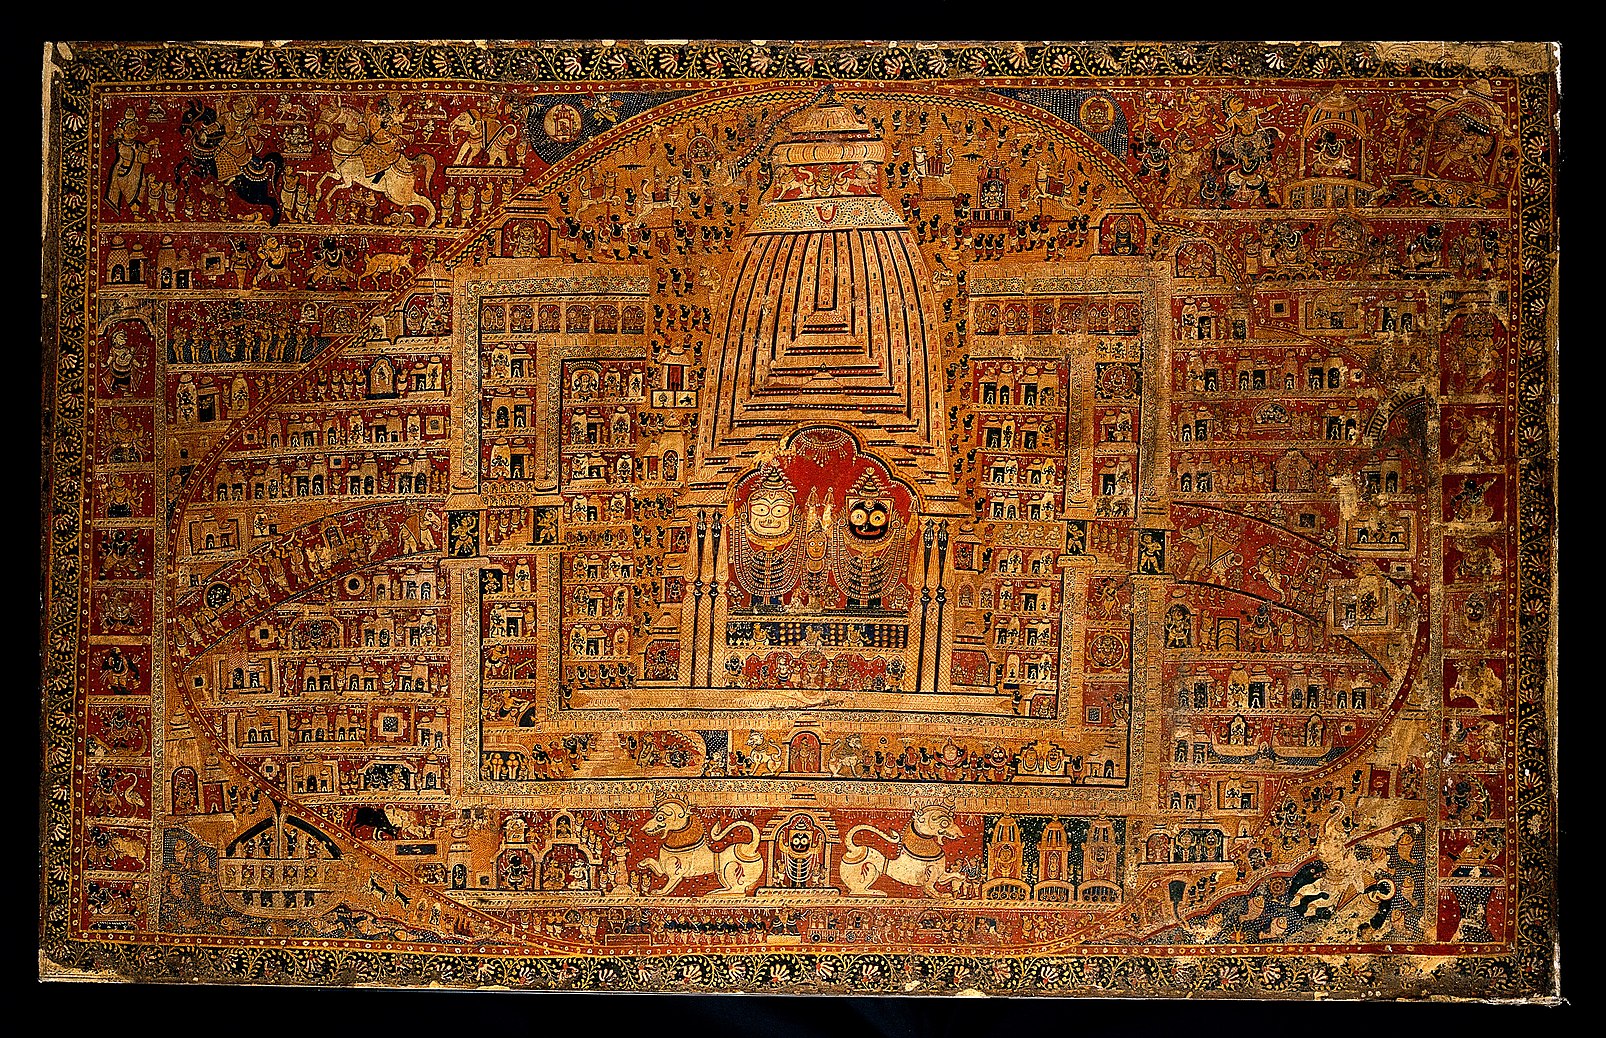 Sankhanabhi Pata, Pattachitra map of the Puri temple, with many human and sacred figures, buildings and animals. By a painter of Puri, Odisha, ca. 1880/1910.